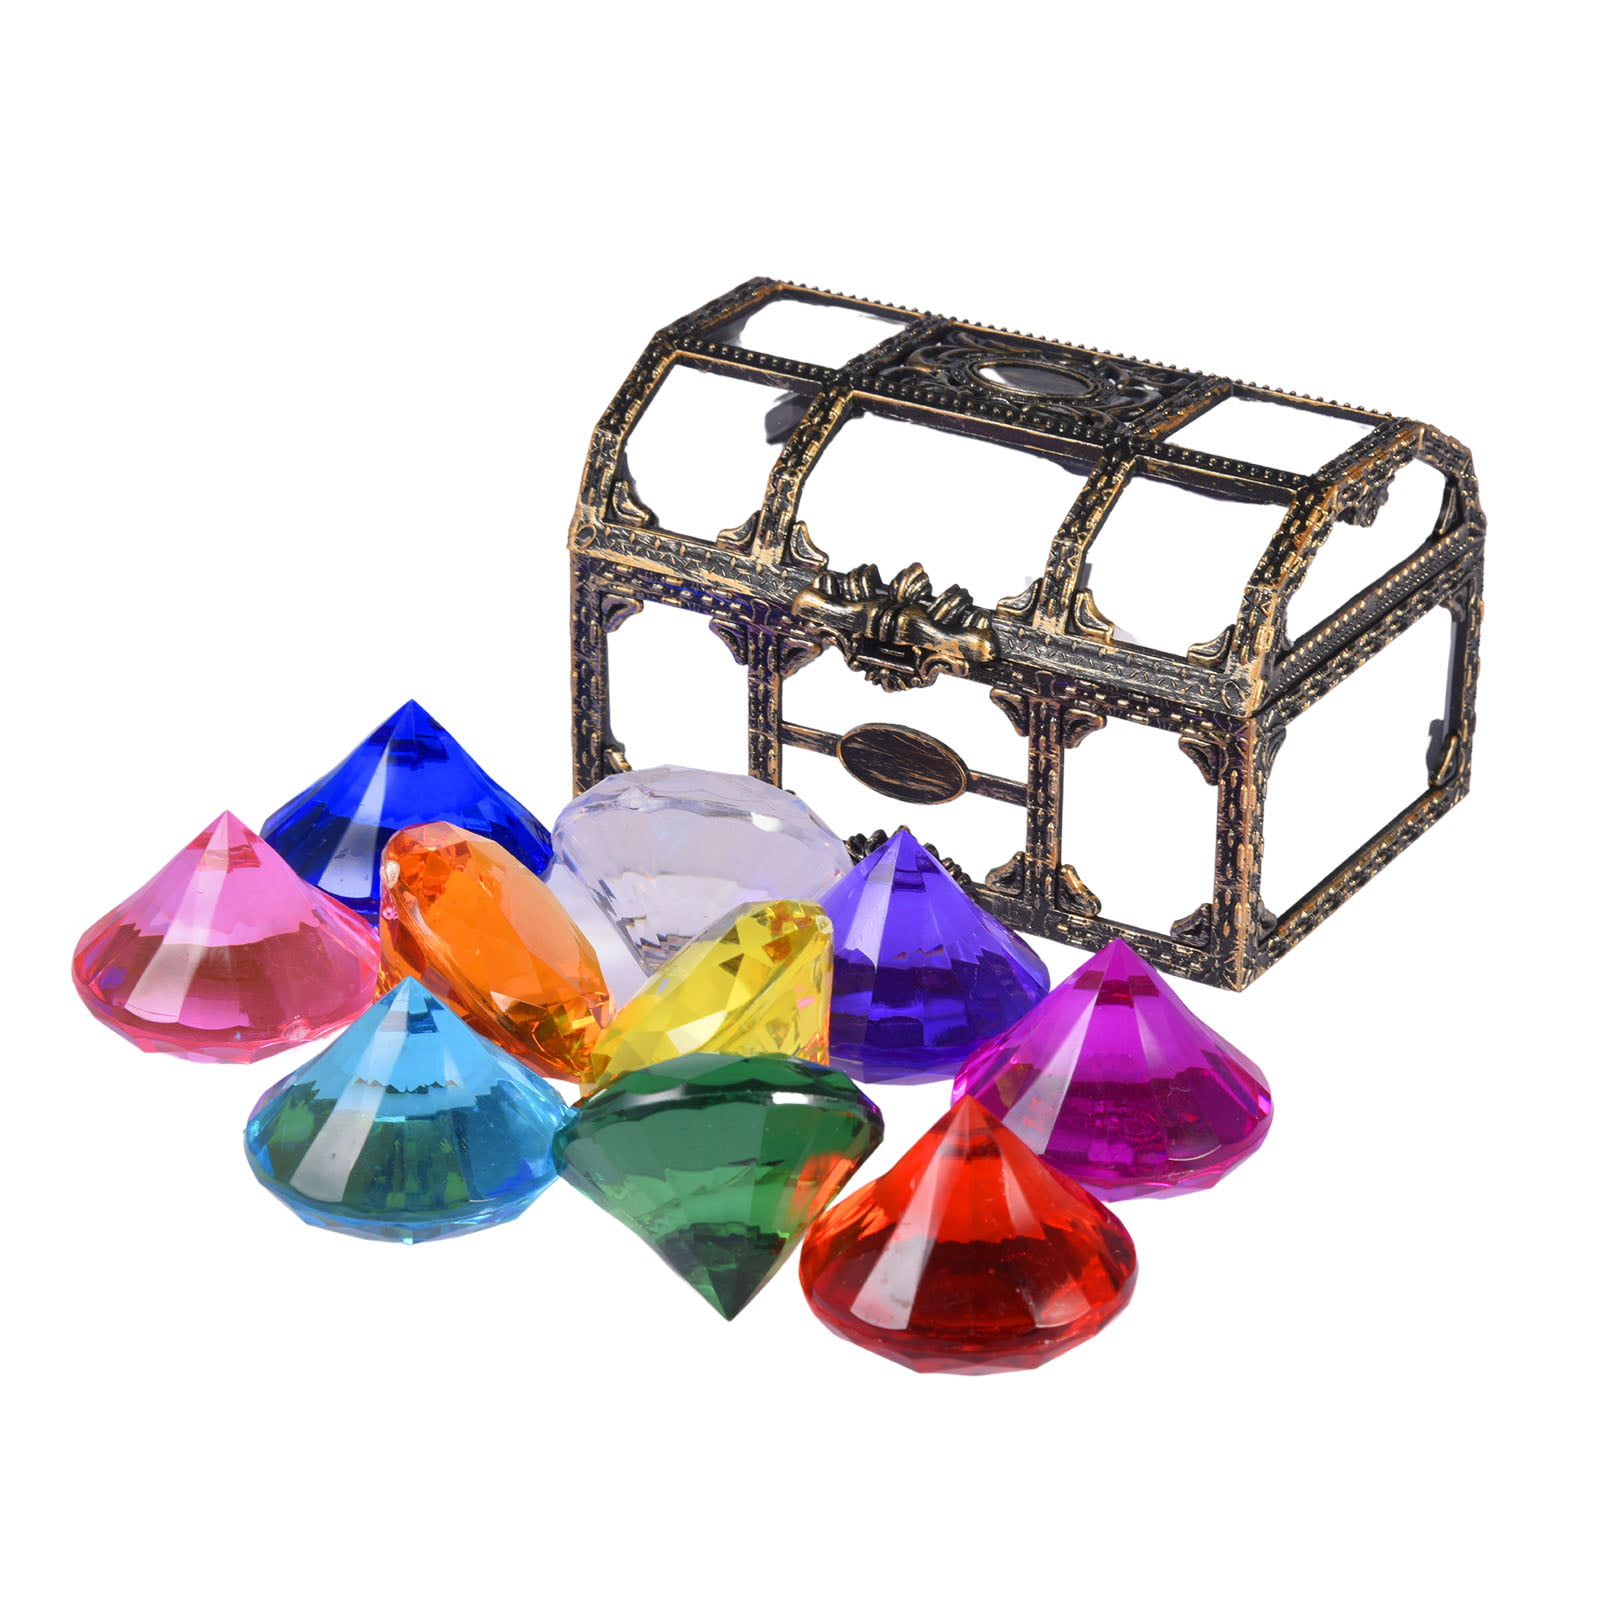 16 Pieces Big Size Treasure Gem Diving Gem DIY Vase Fillers Pool Toys Colorful Summer Swimming Acrylic Treasure Gem Diving Toys Underwater Toy for Parties and Games Birthday,Wedding Decoration Gems 